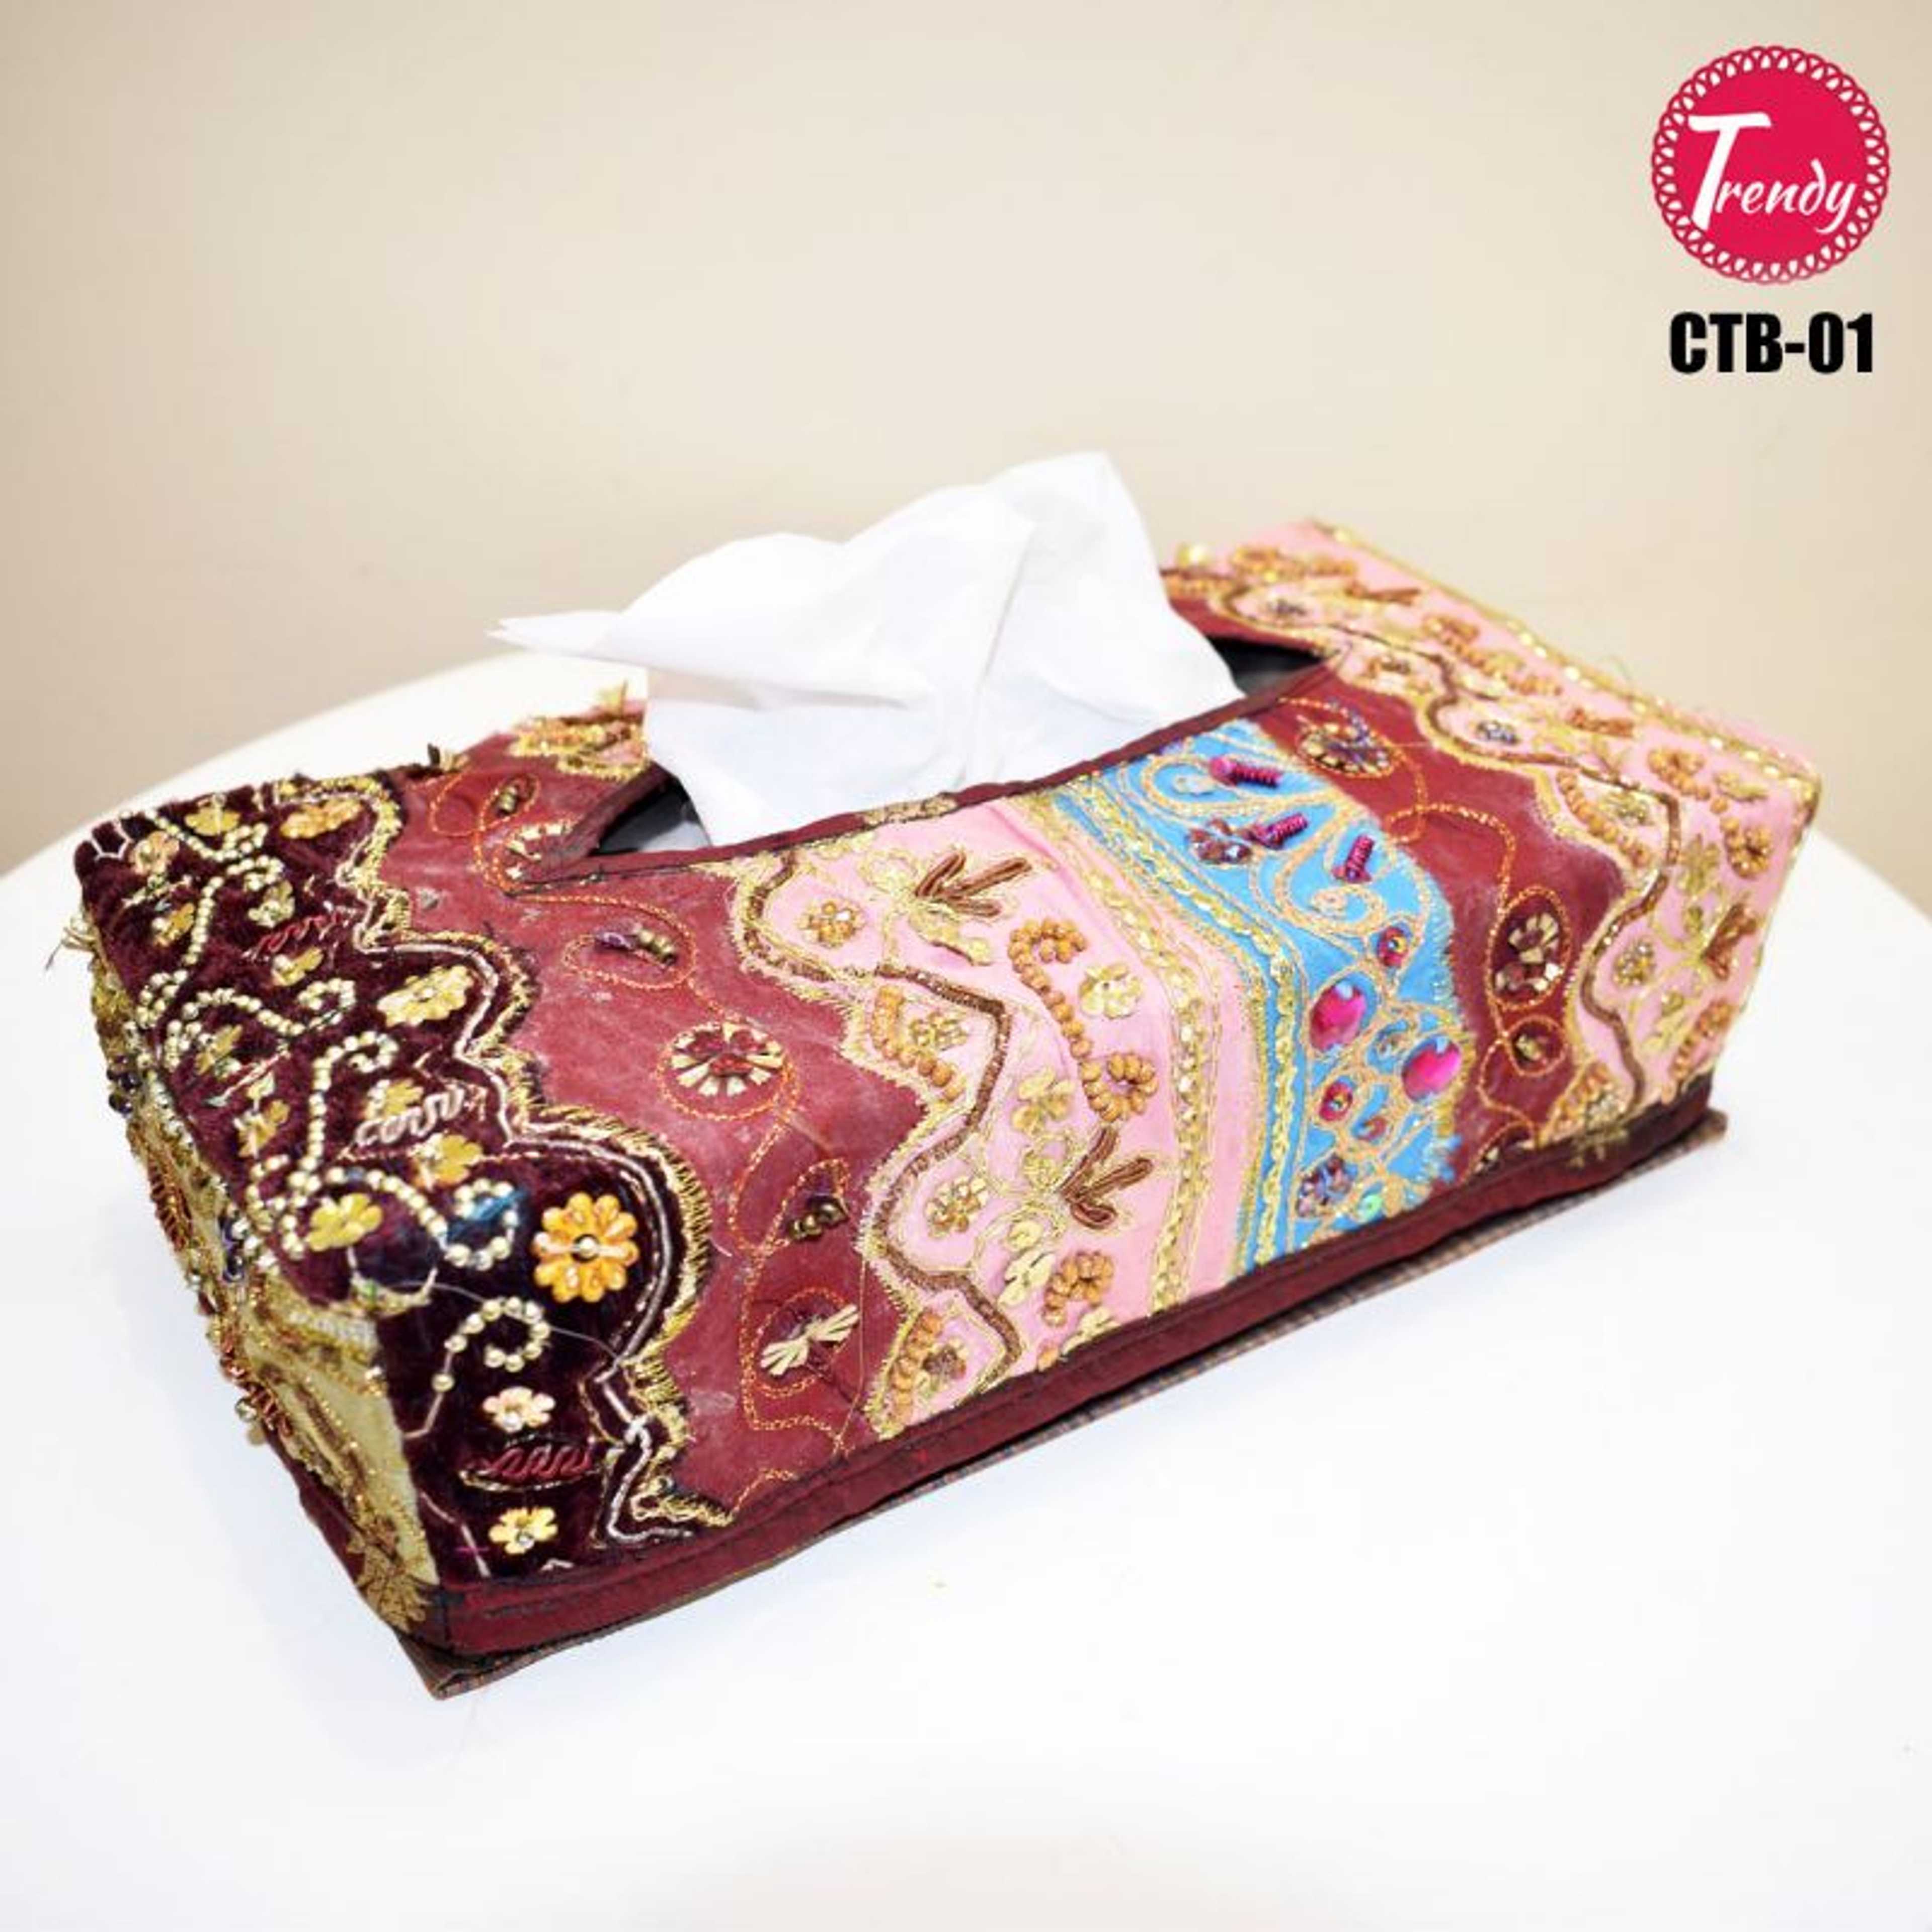 Sindhi Hand Embroidery Fabric Tissue Box Cover CTB-01